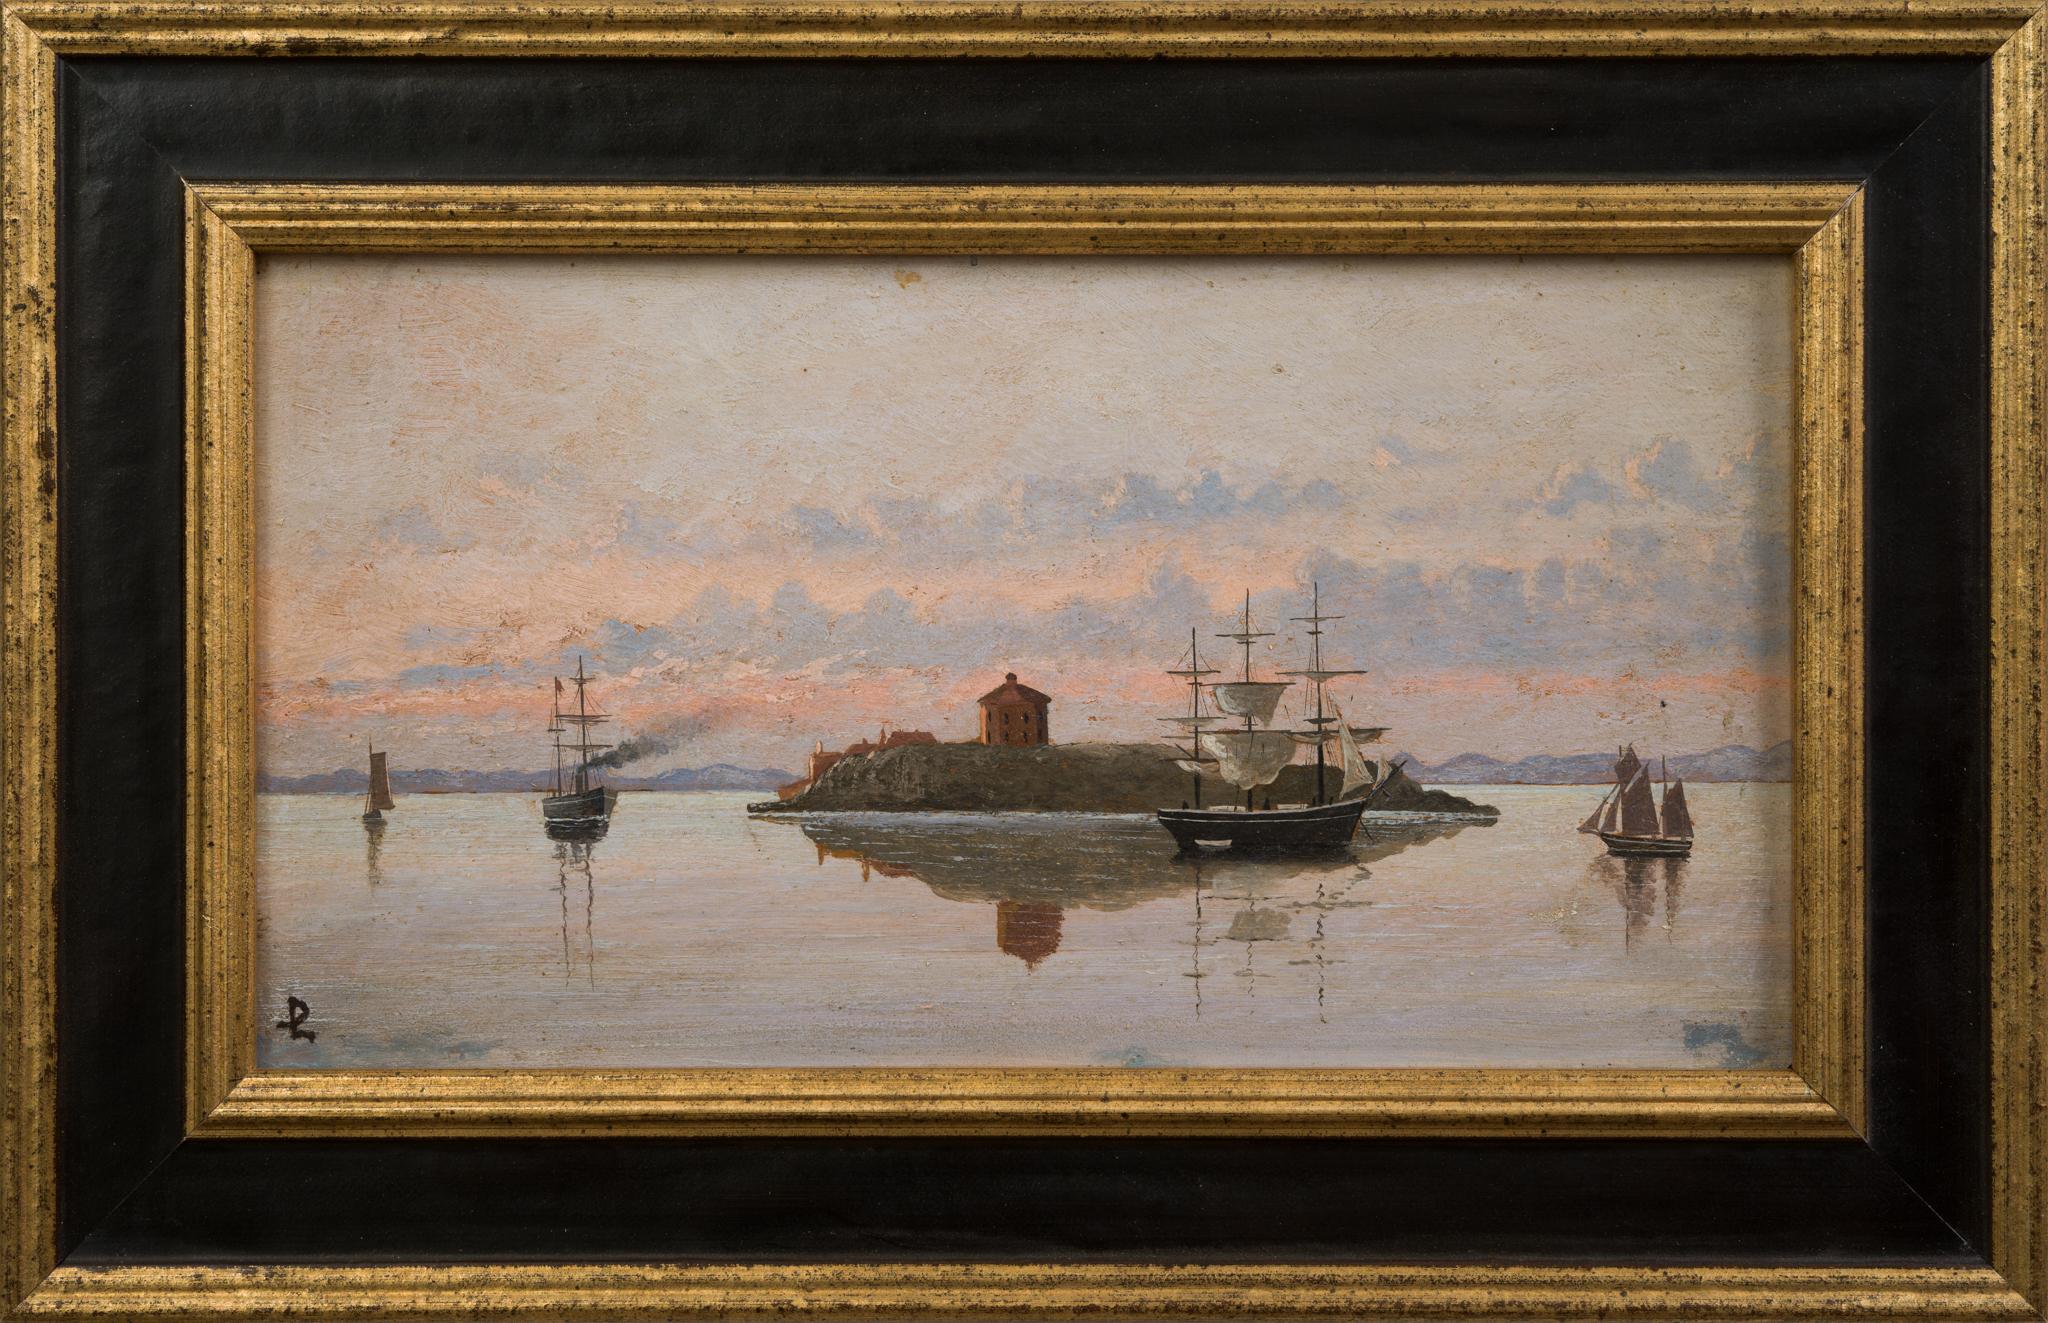 This exquisite painting by Per Linér, a distinguished Swedish artist born in the 19th century, eloquently captures the serene maritime essence of what appears to be the Helsingborg region. The canvas is brought to life with a selection of ships that